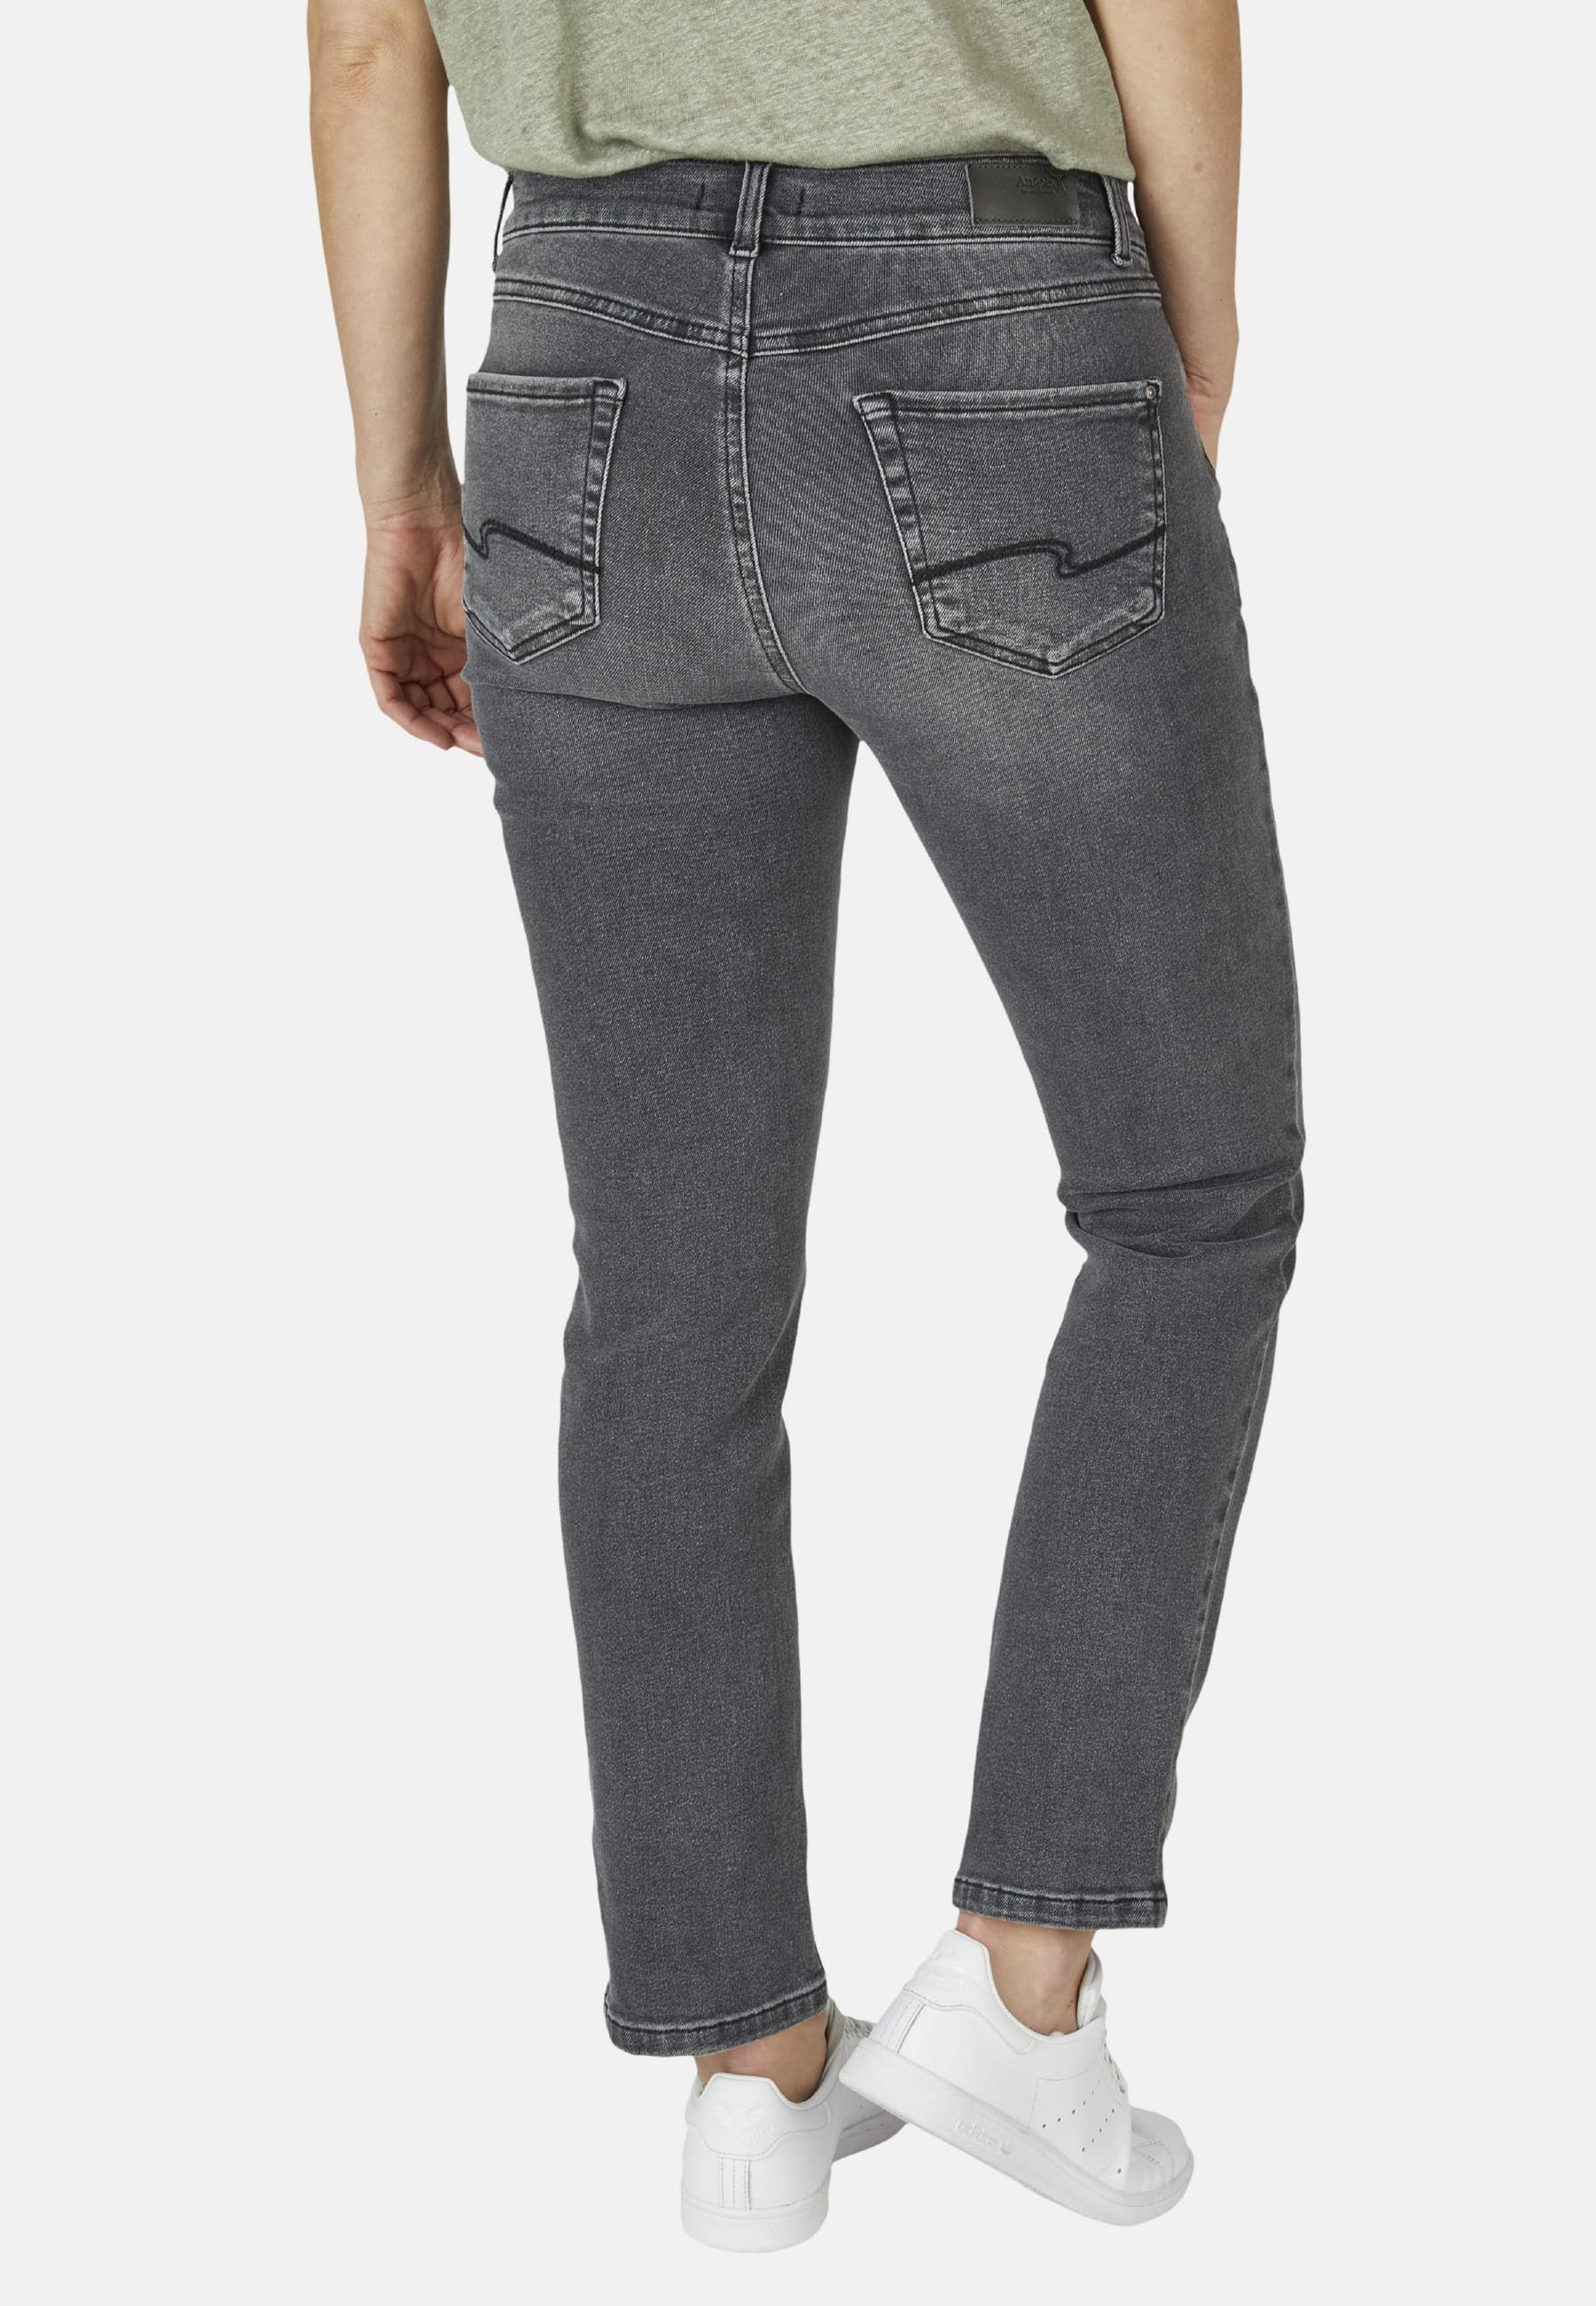 Jeans Cici ANGELS grau Used-Waschung Label-Applikationen mit mit Straight-Jeans